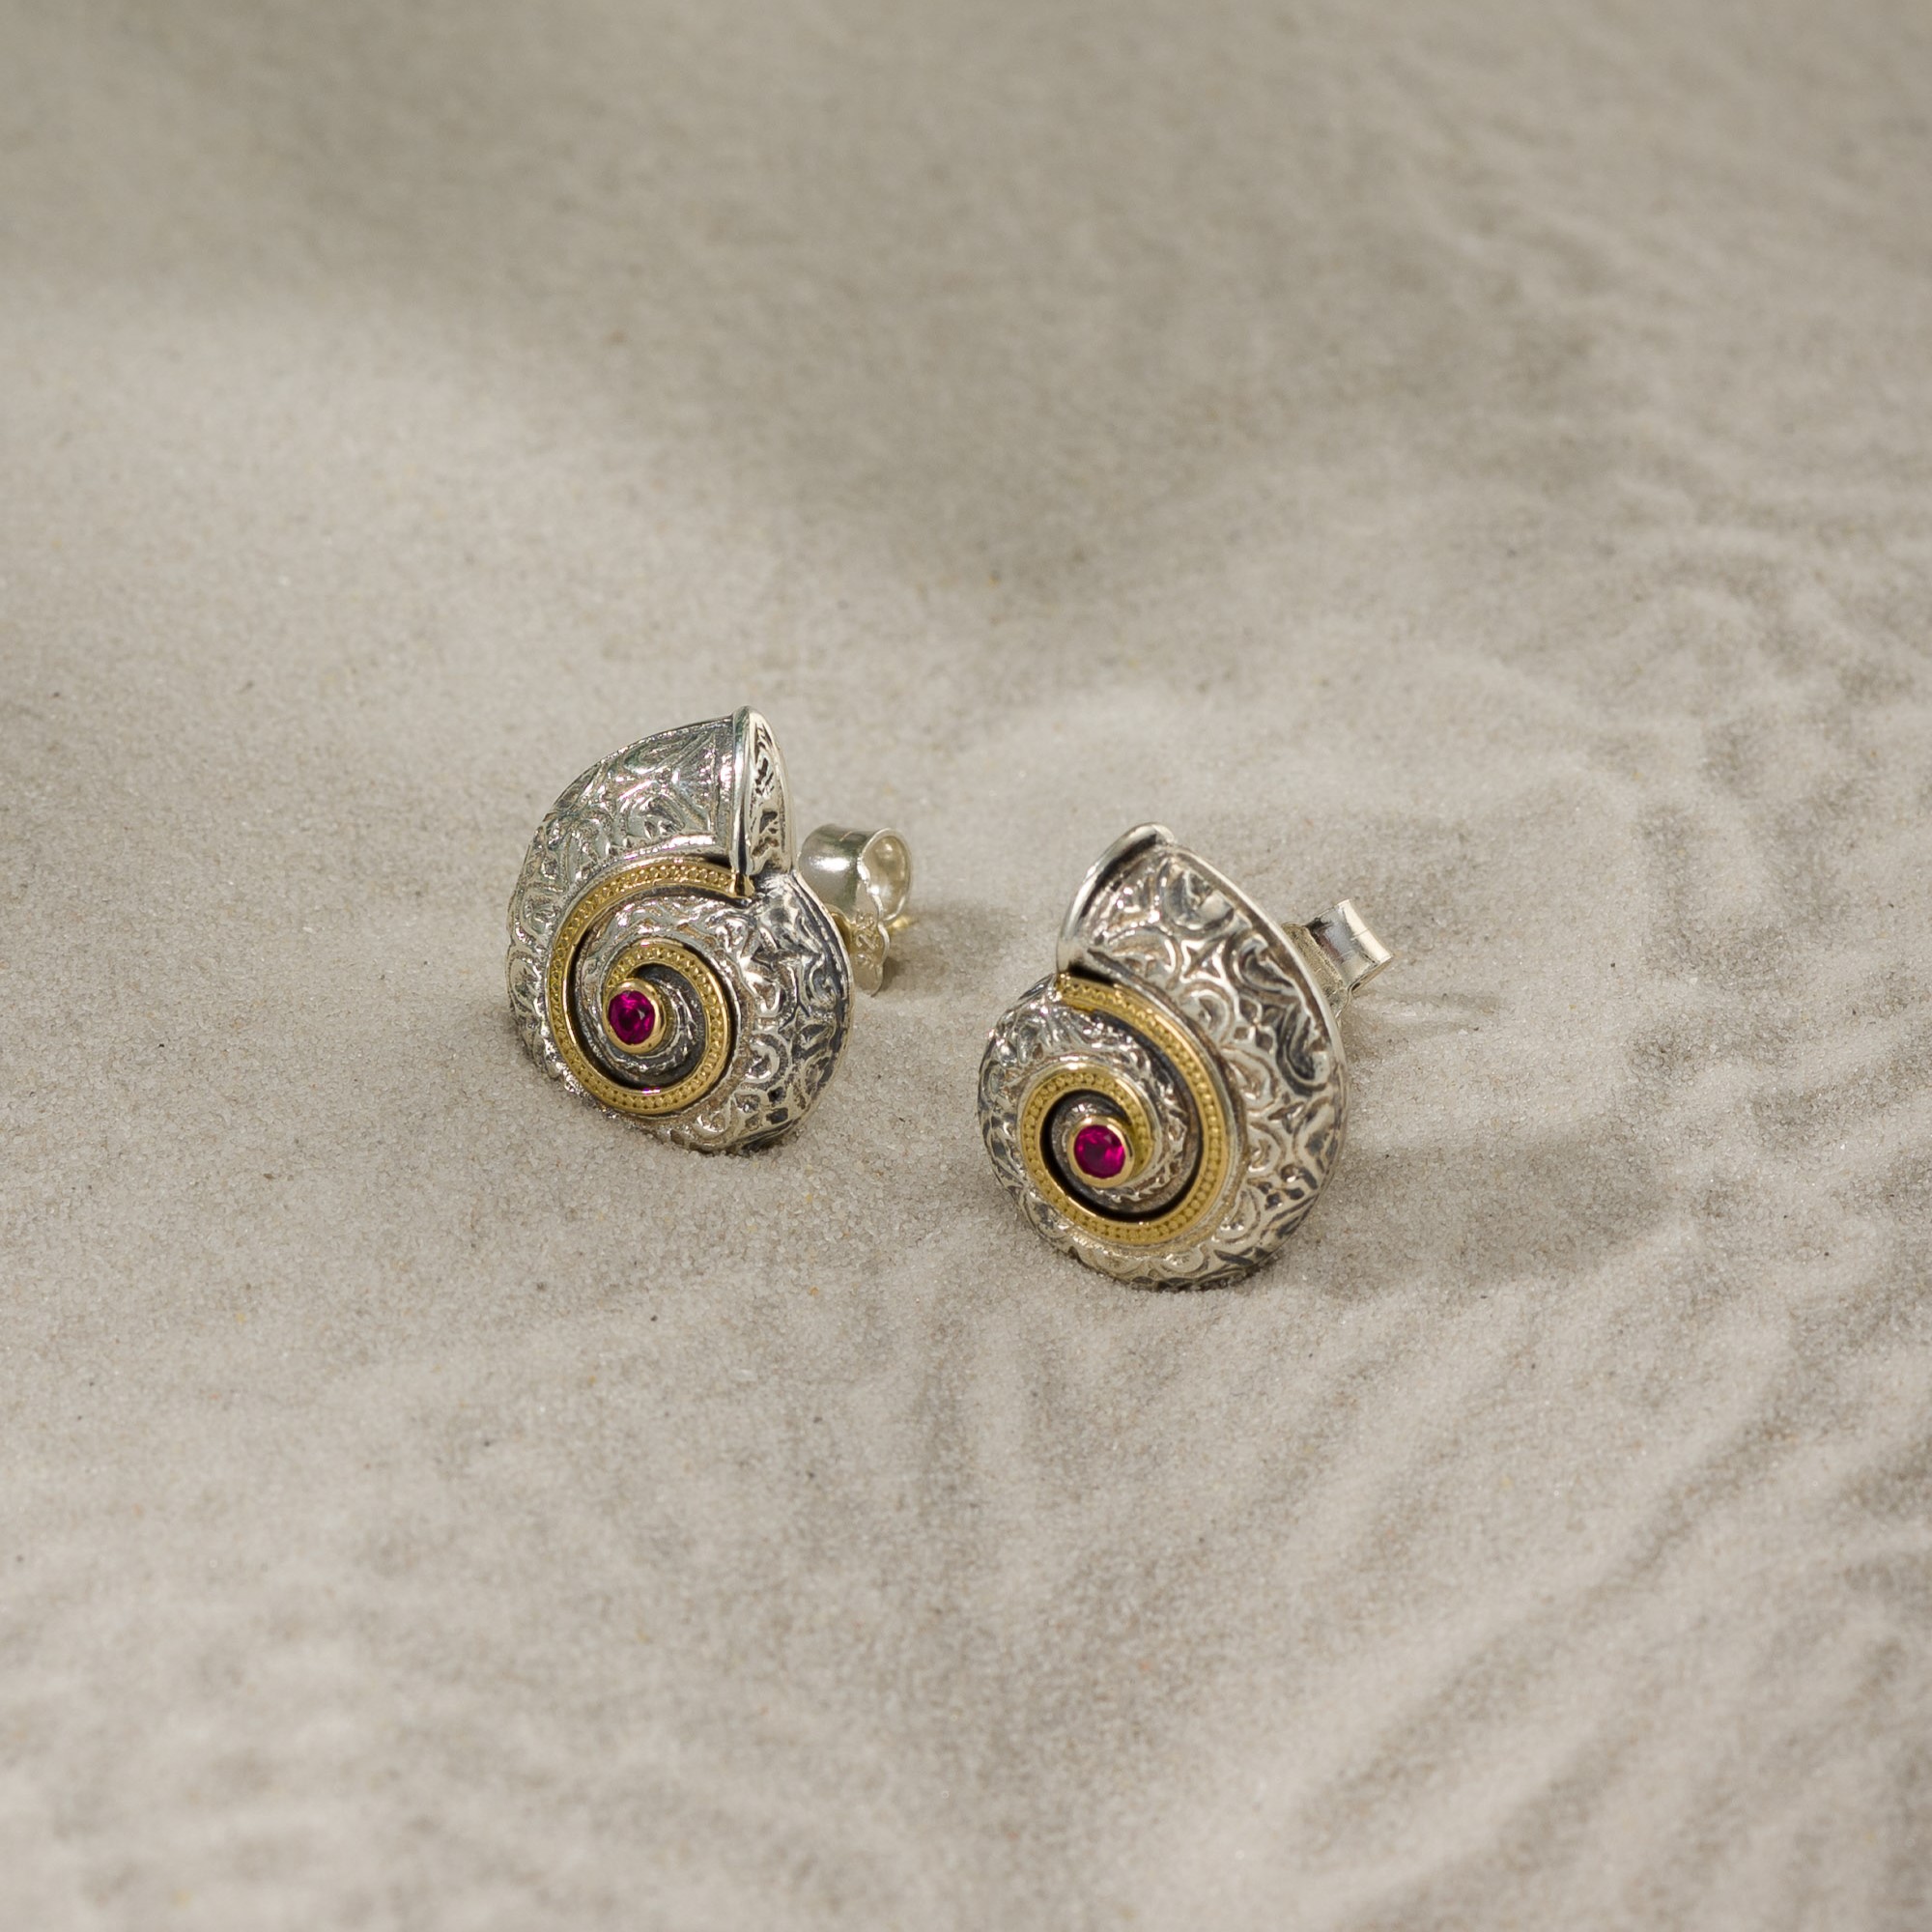 Sea Snail stud Earrings in 18K Gold and Sterling silver with rubies